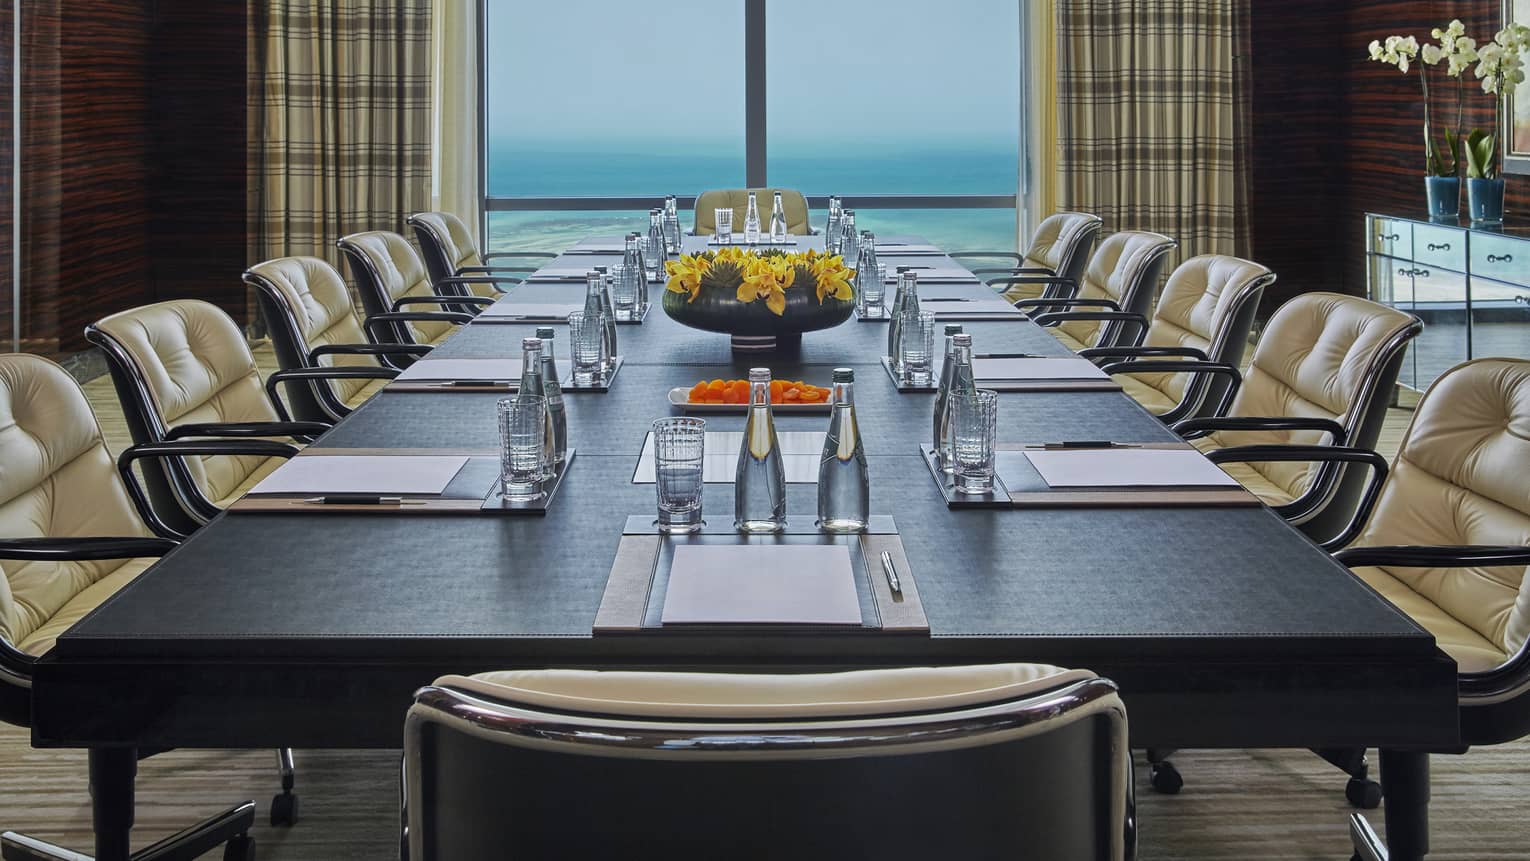 Large boardroom meeting table lined with plush leather chairs in front of window with ocean view